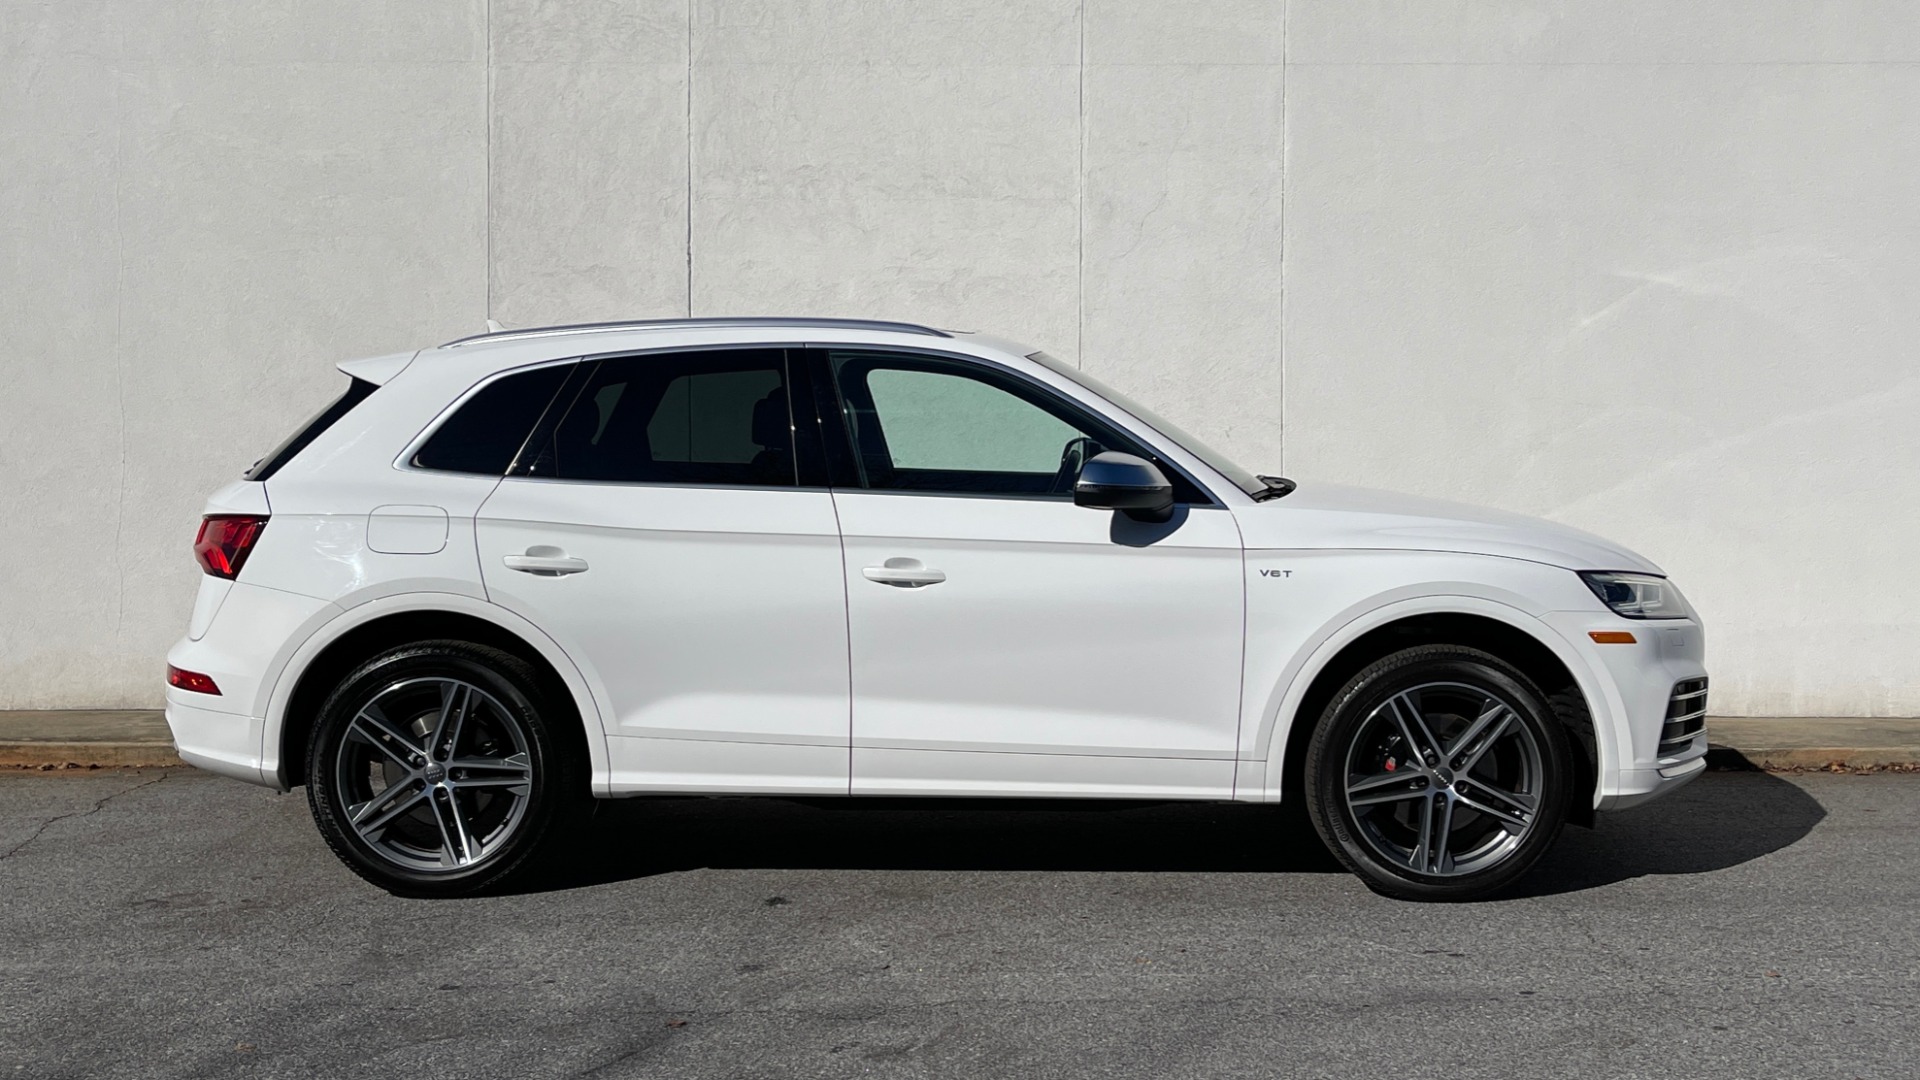 Used 2018 Audi SQ5 PREMIUM PLUS / NAV / SUNROOF / 12.3IN SCREEN / REARVIEW for sale $46,795 at Formula Imports in Charlotte NC 28227 7